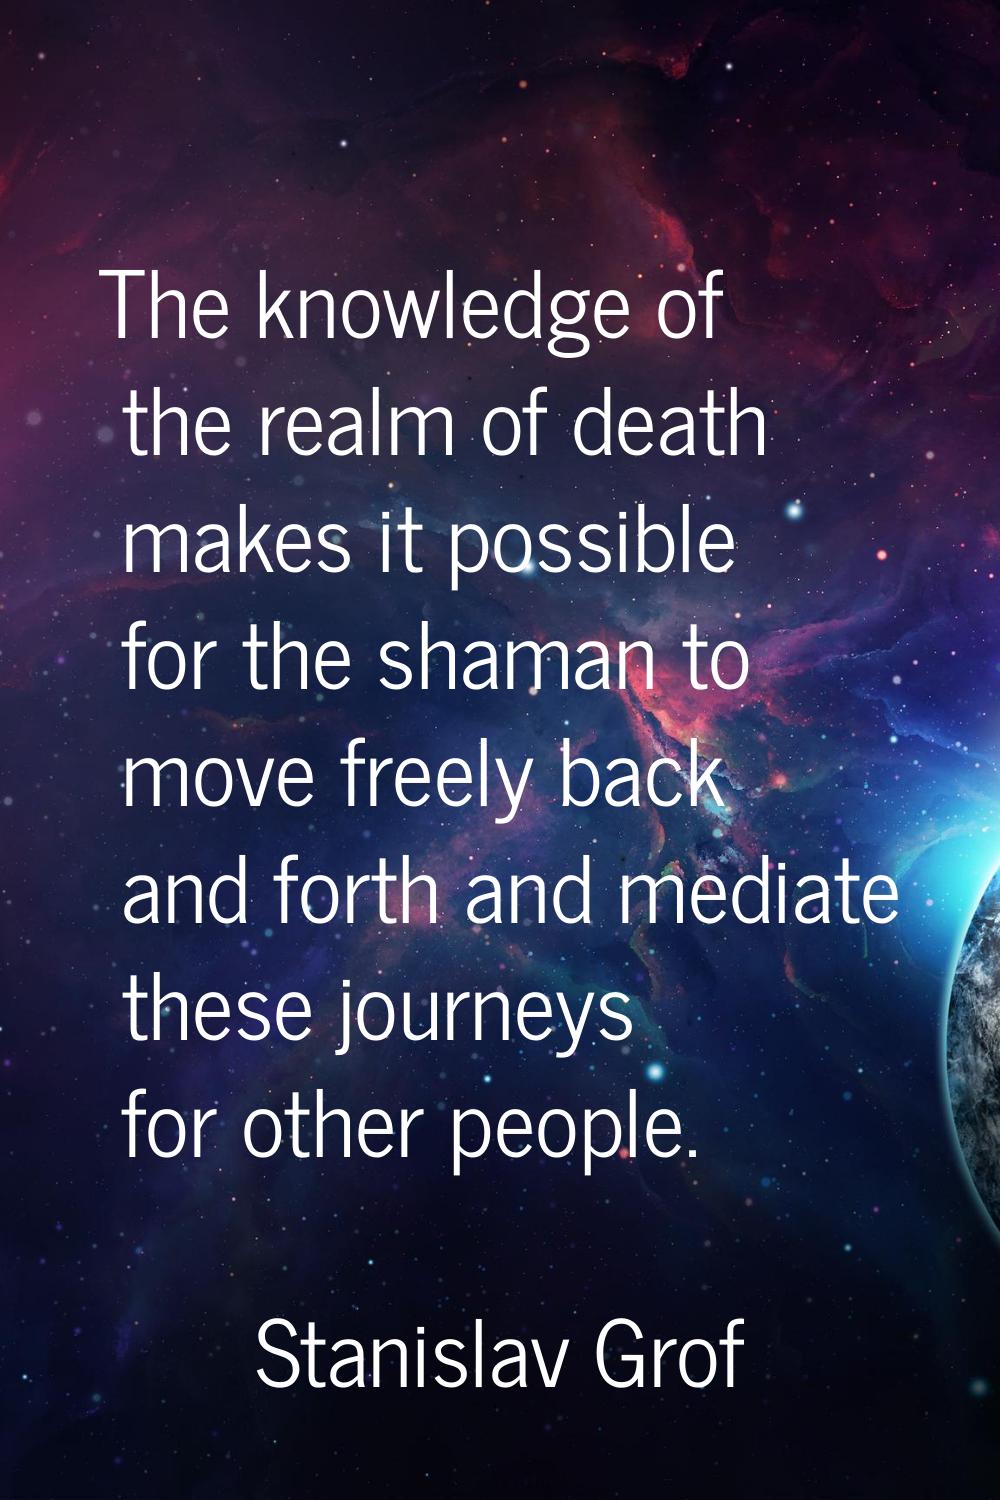 The knowledge of the realm of death makes it possible for the shaman to move freely back and forth 